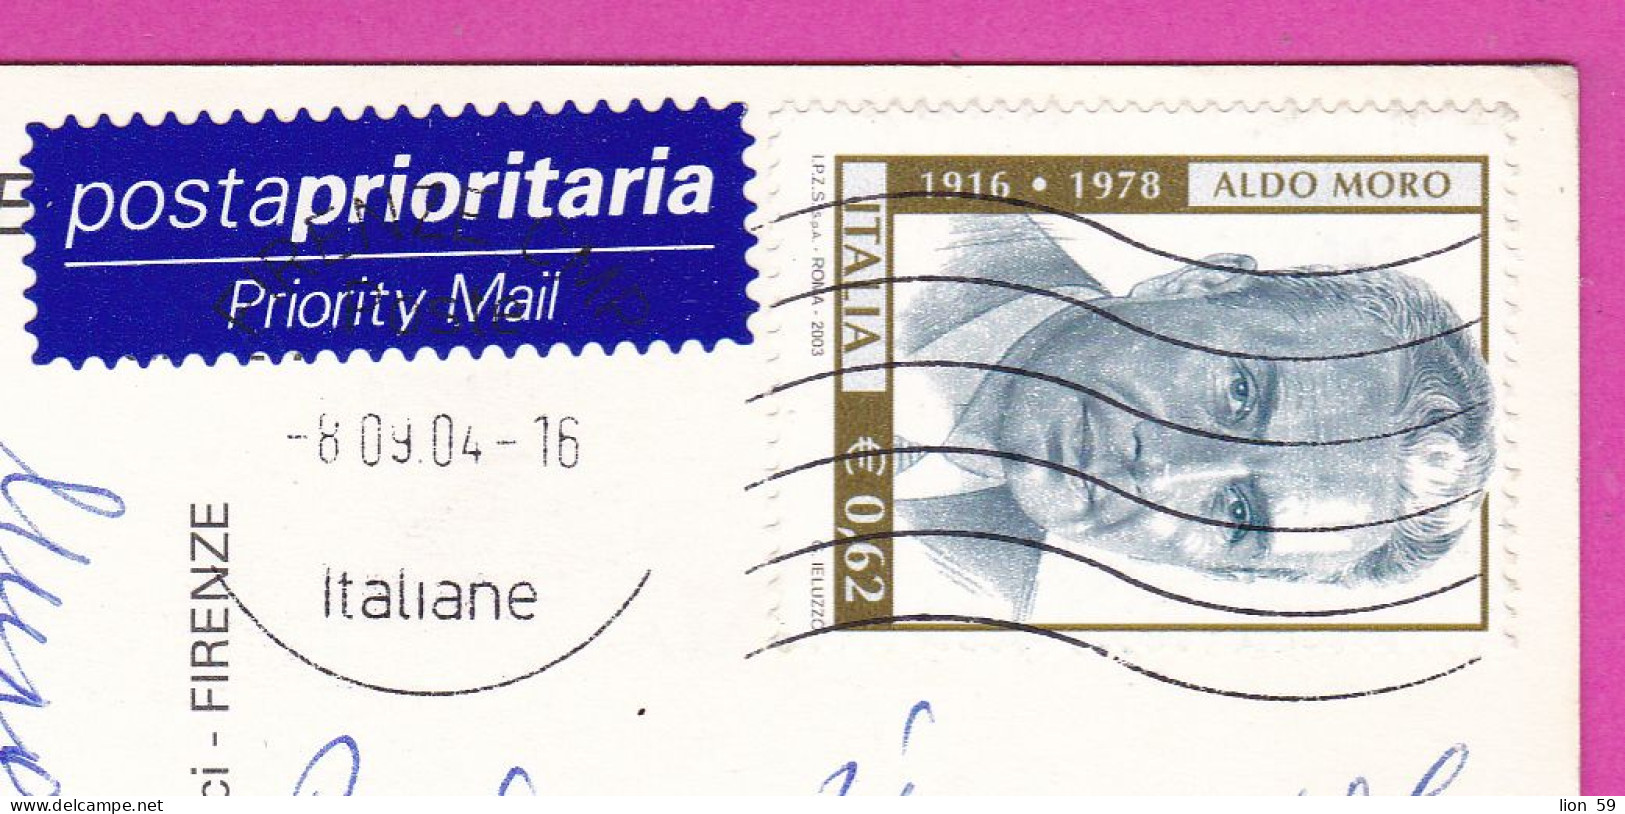 294053 / Italy - FIRENZE Panoram A Notturno Night PC 2004 USED - 0.62€ Death Of Aldo Moro Former Prime Minister - 2001-10: Storia Postale